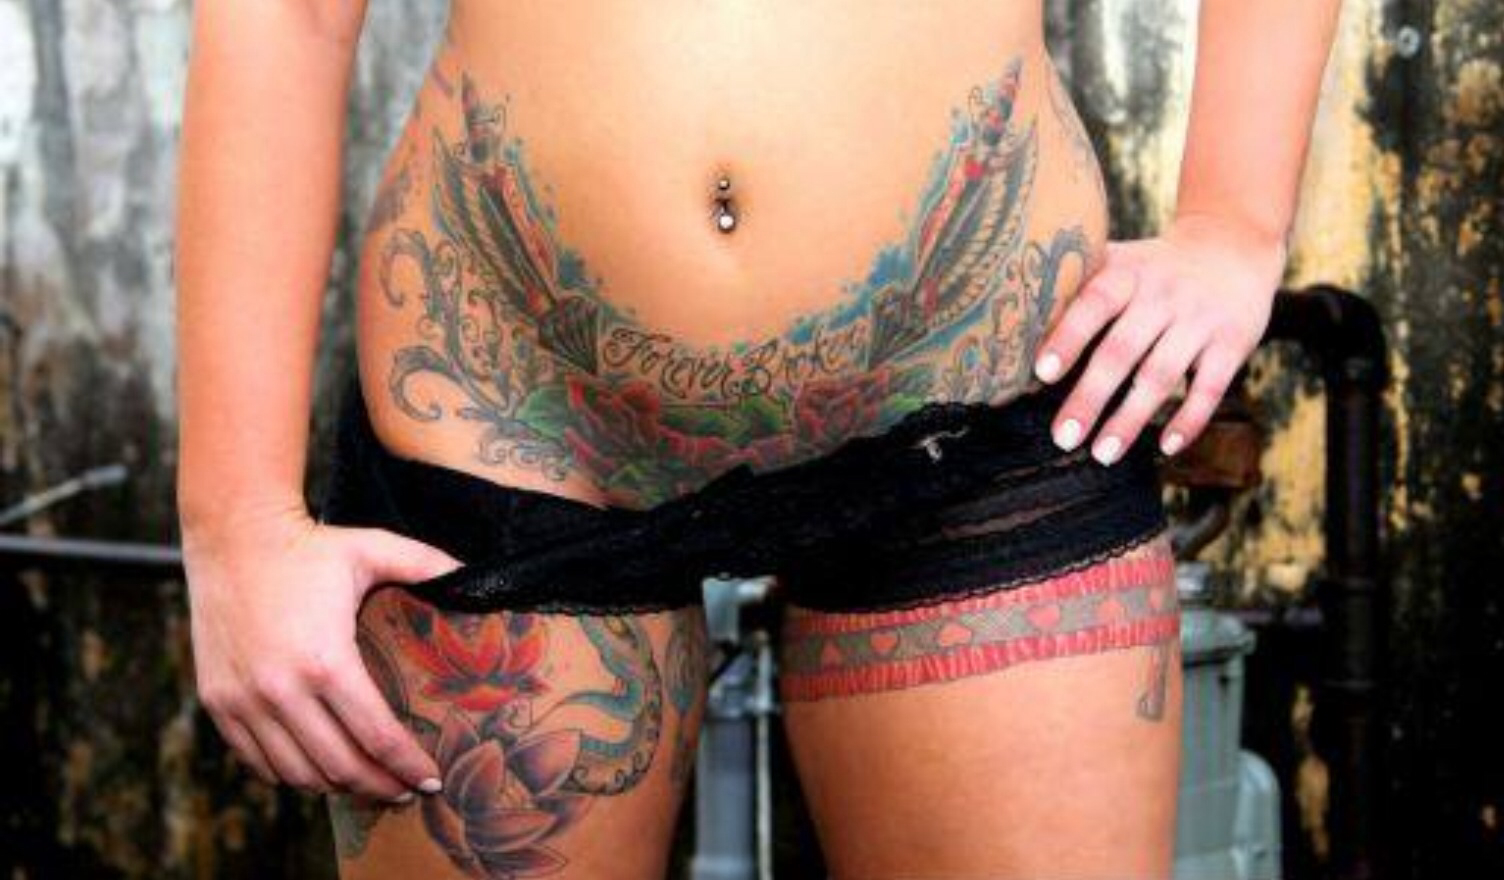 Tattooed chick thigh high fencenet fucked image